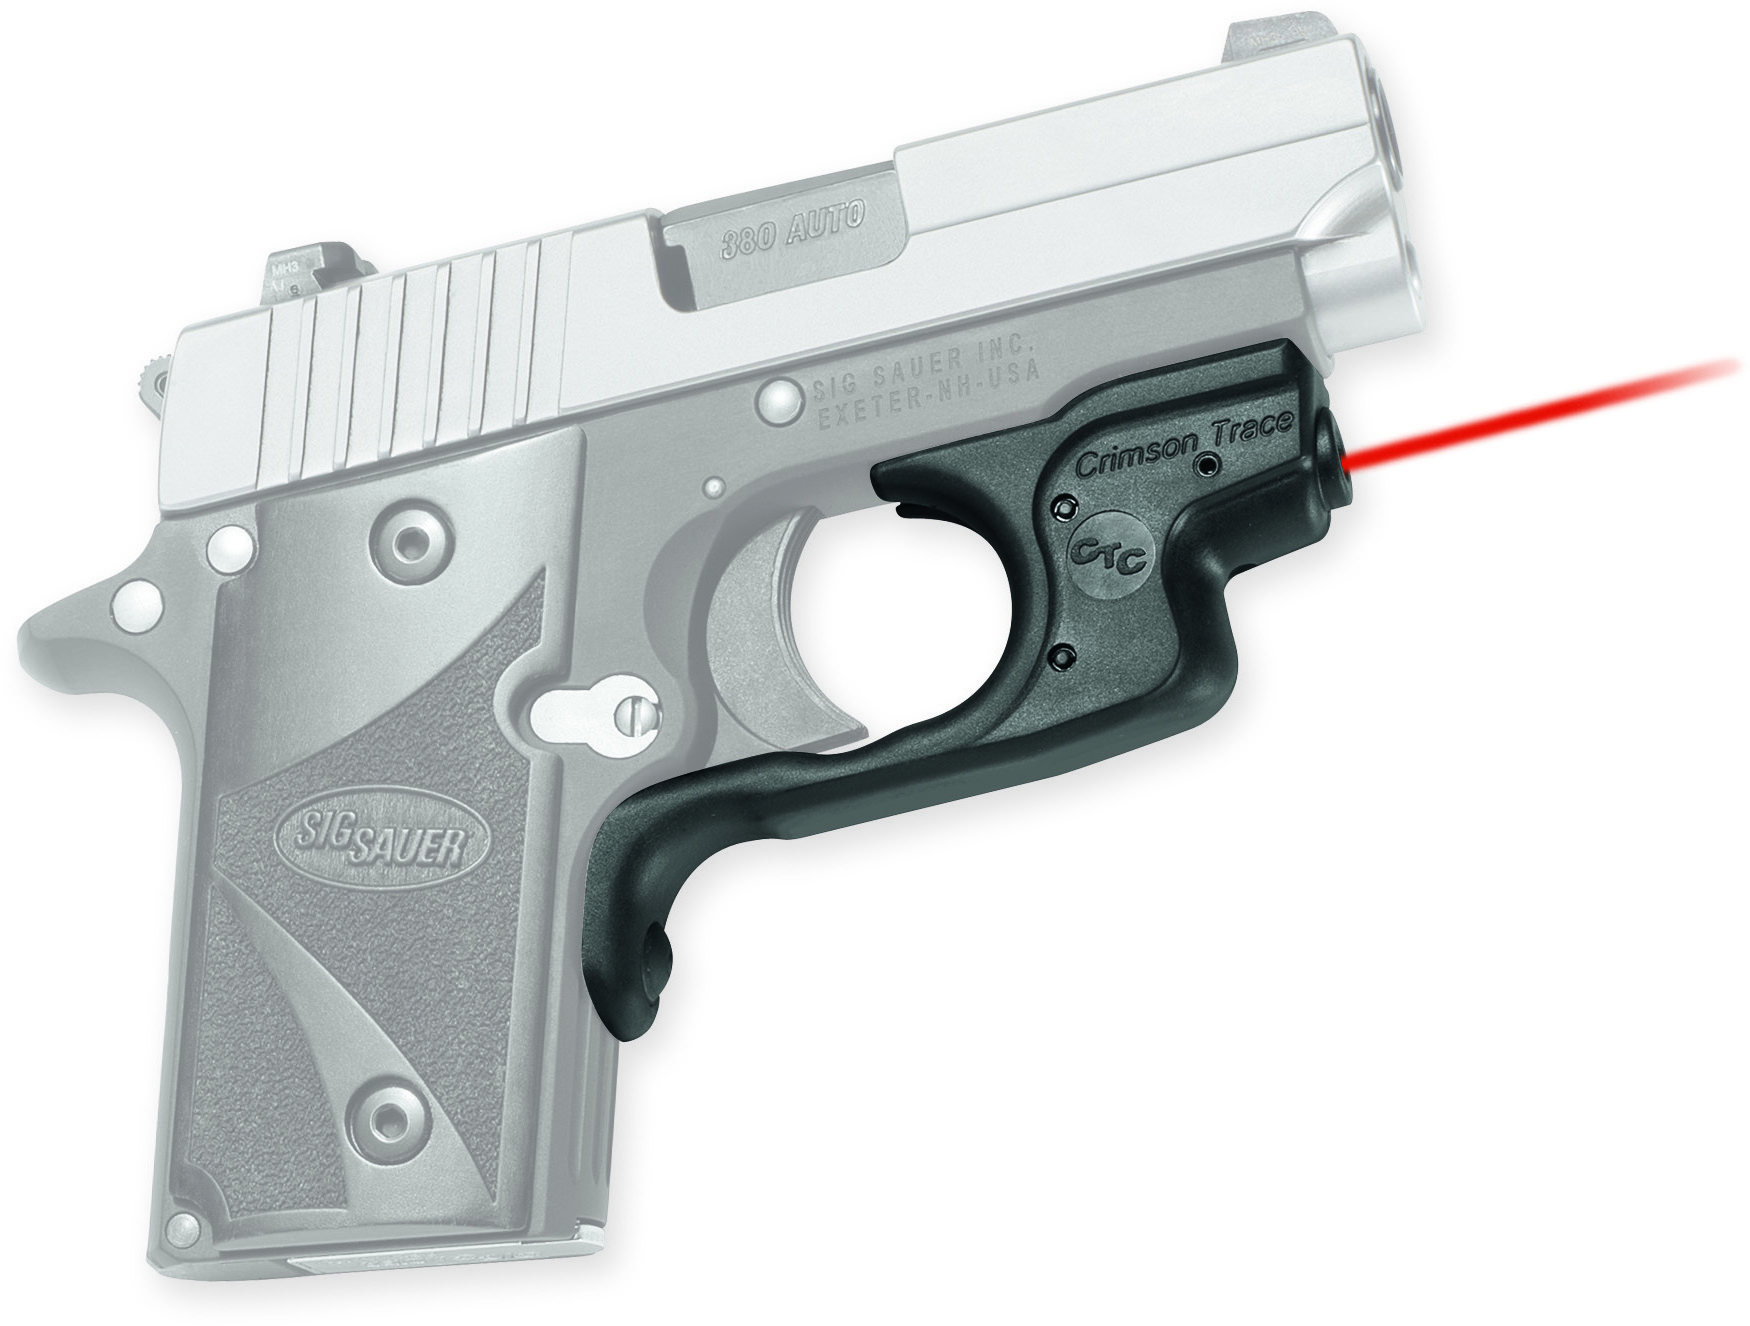 ArmaLaser TR8G Green Laser for SIG SAUER P238 and P938 for sale online 